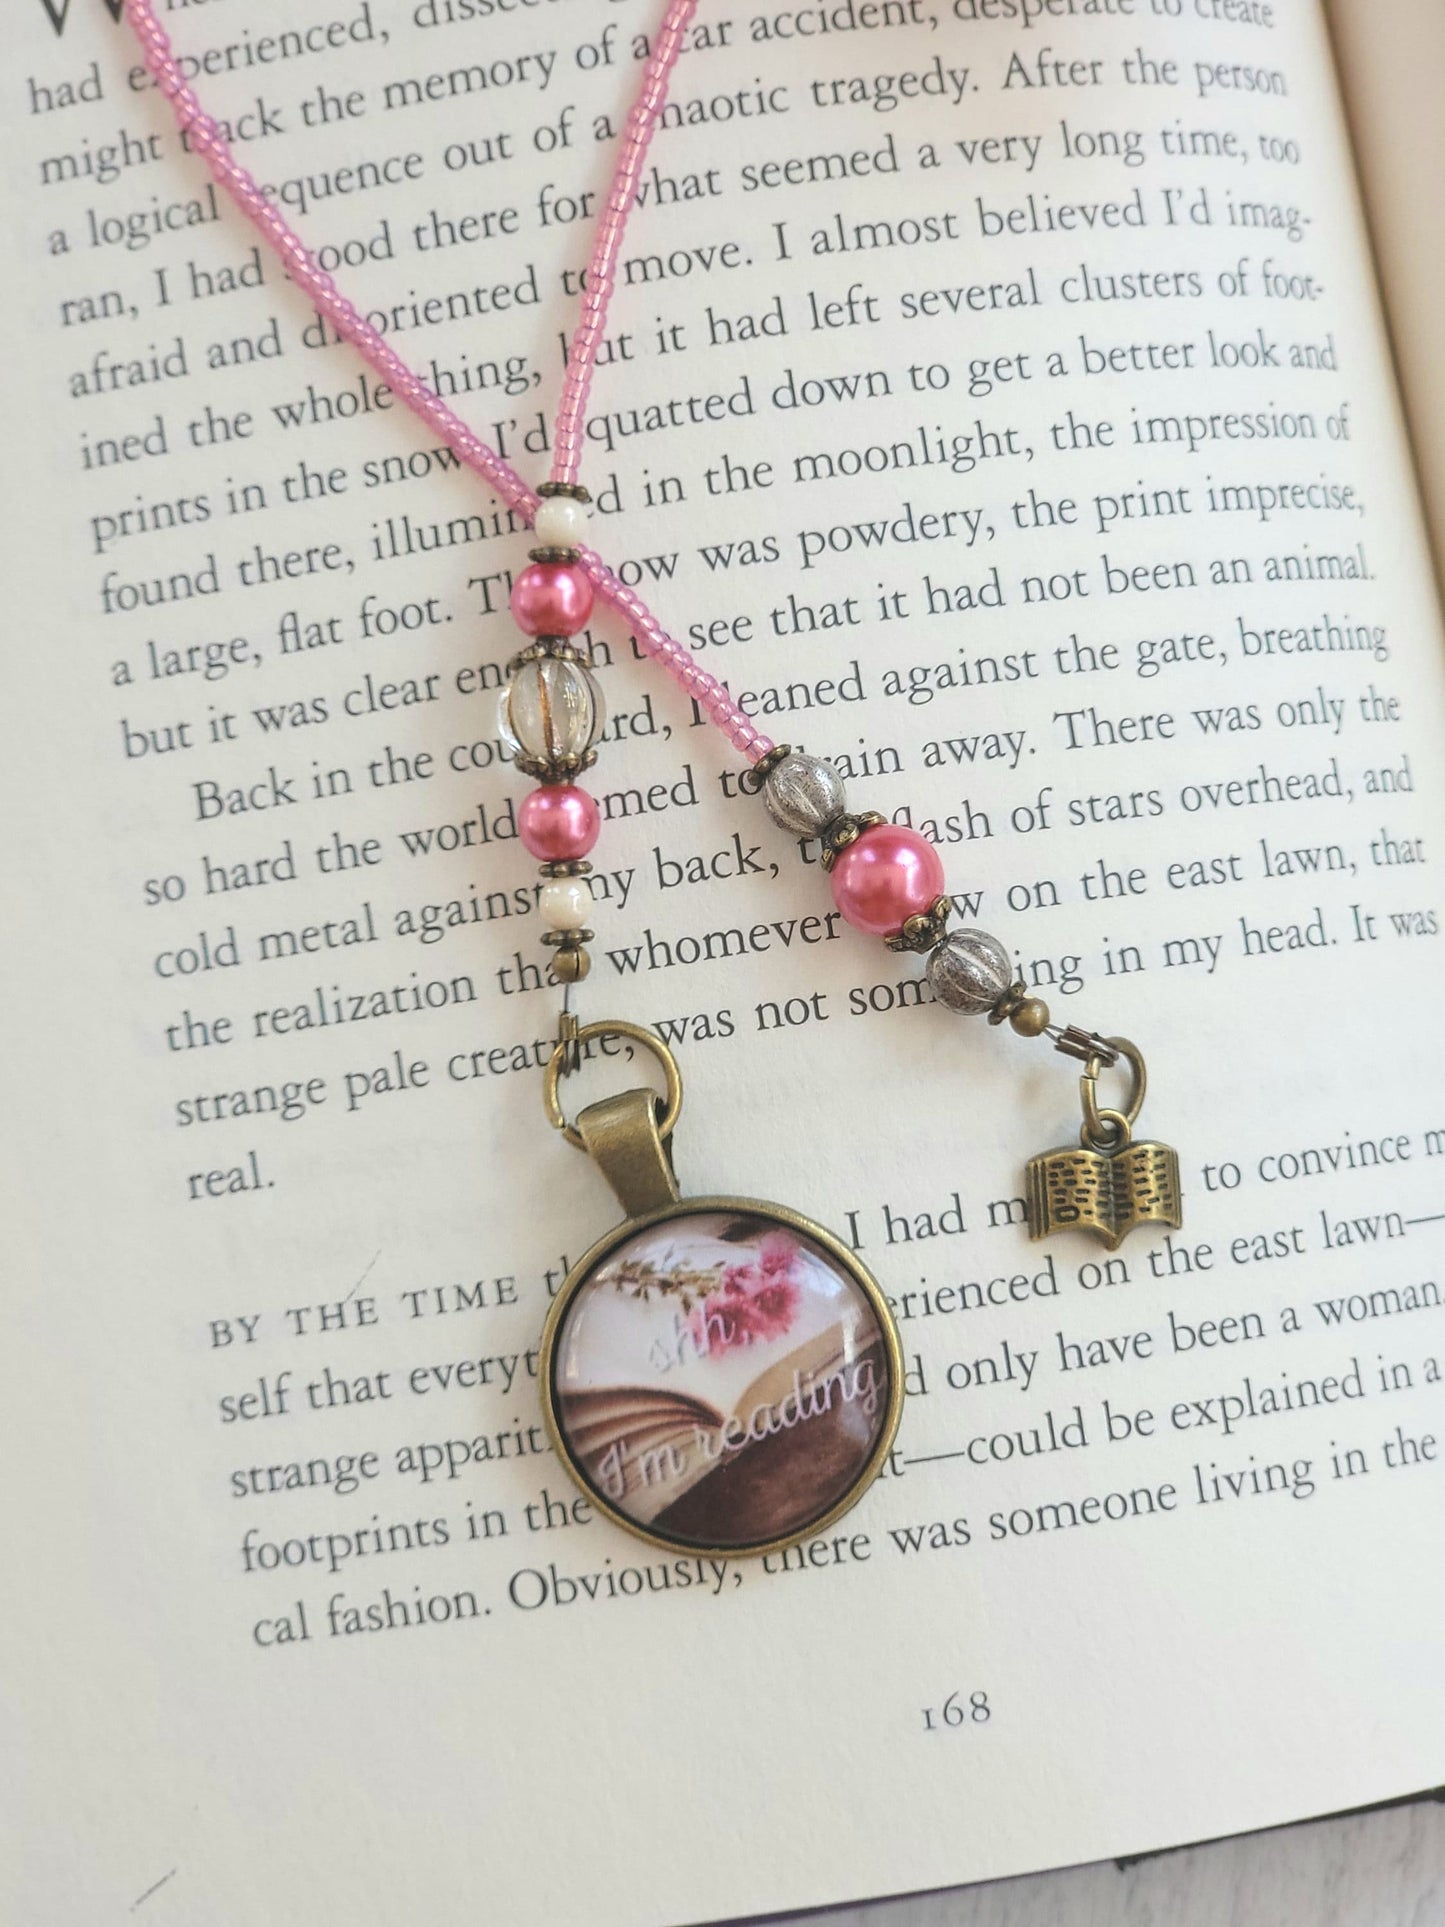 Beaded Bookmark with Bronze Plated Vintage Style Details, Bookworm Gift